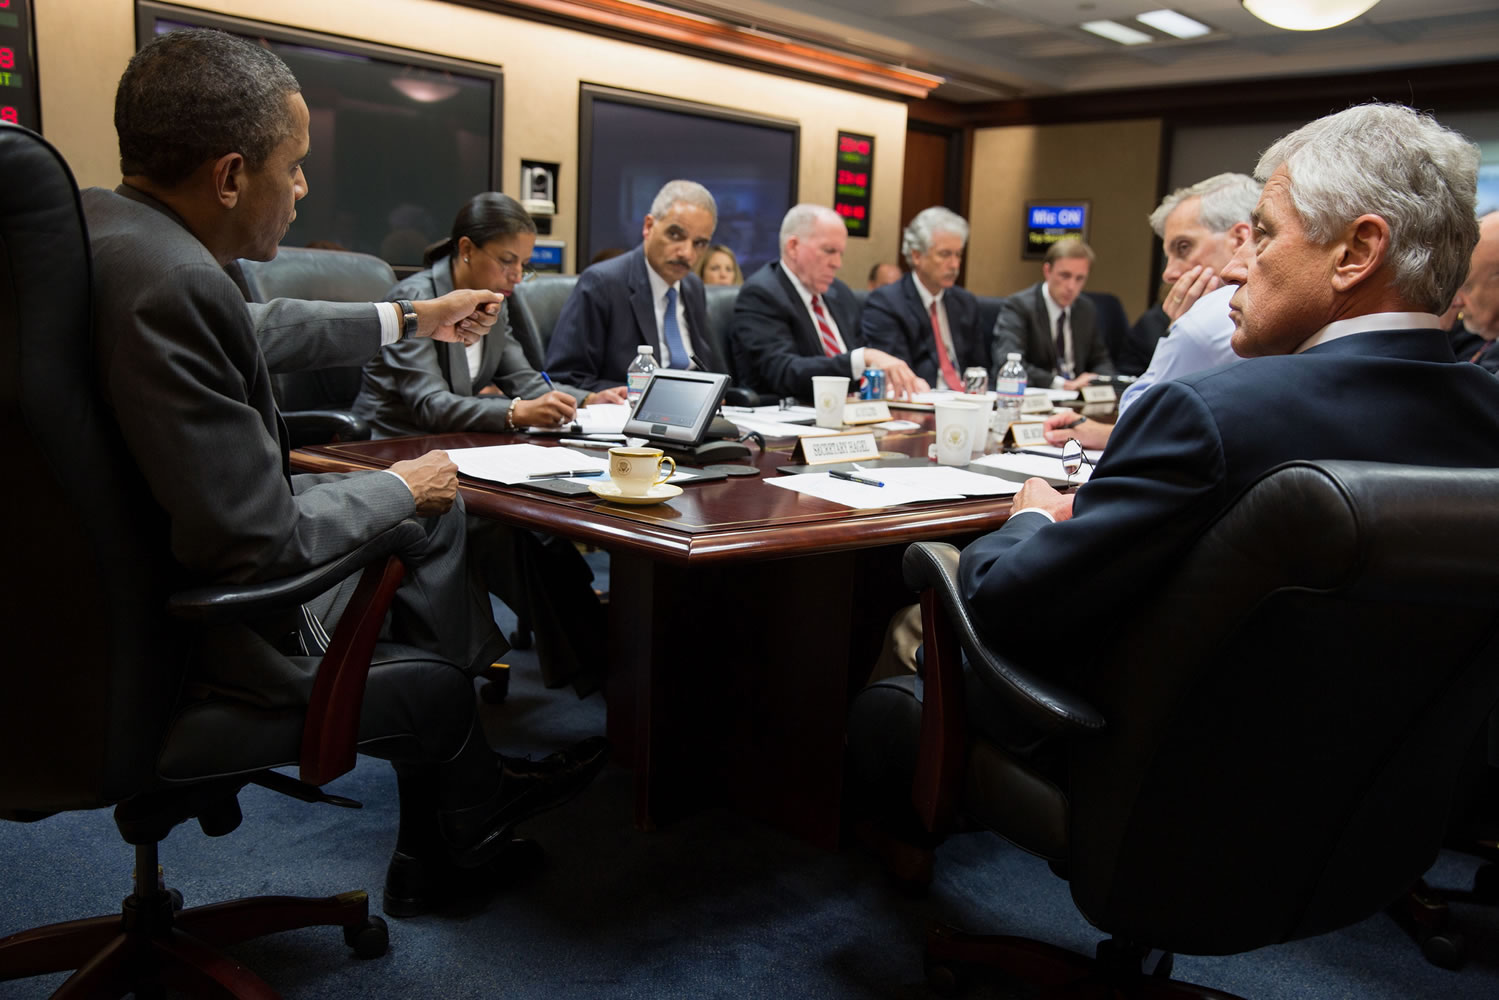 President Barack Obama meets with members of his national security team Wednesday to discuss the situation in Egypt in the Situation Room of the White House in Washington.